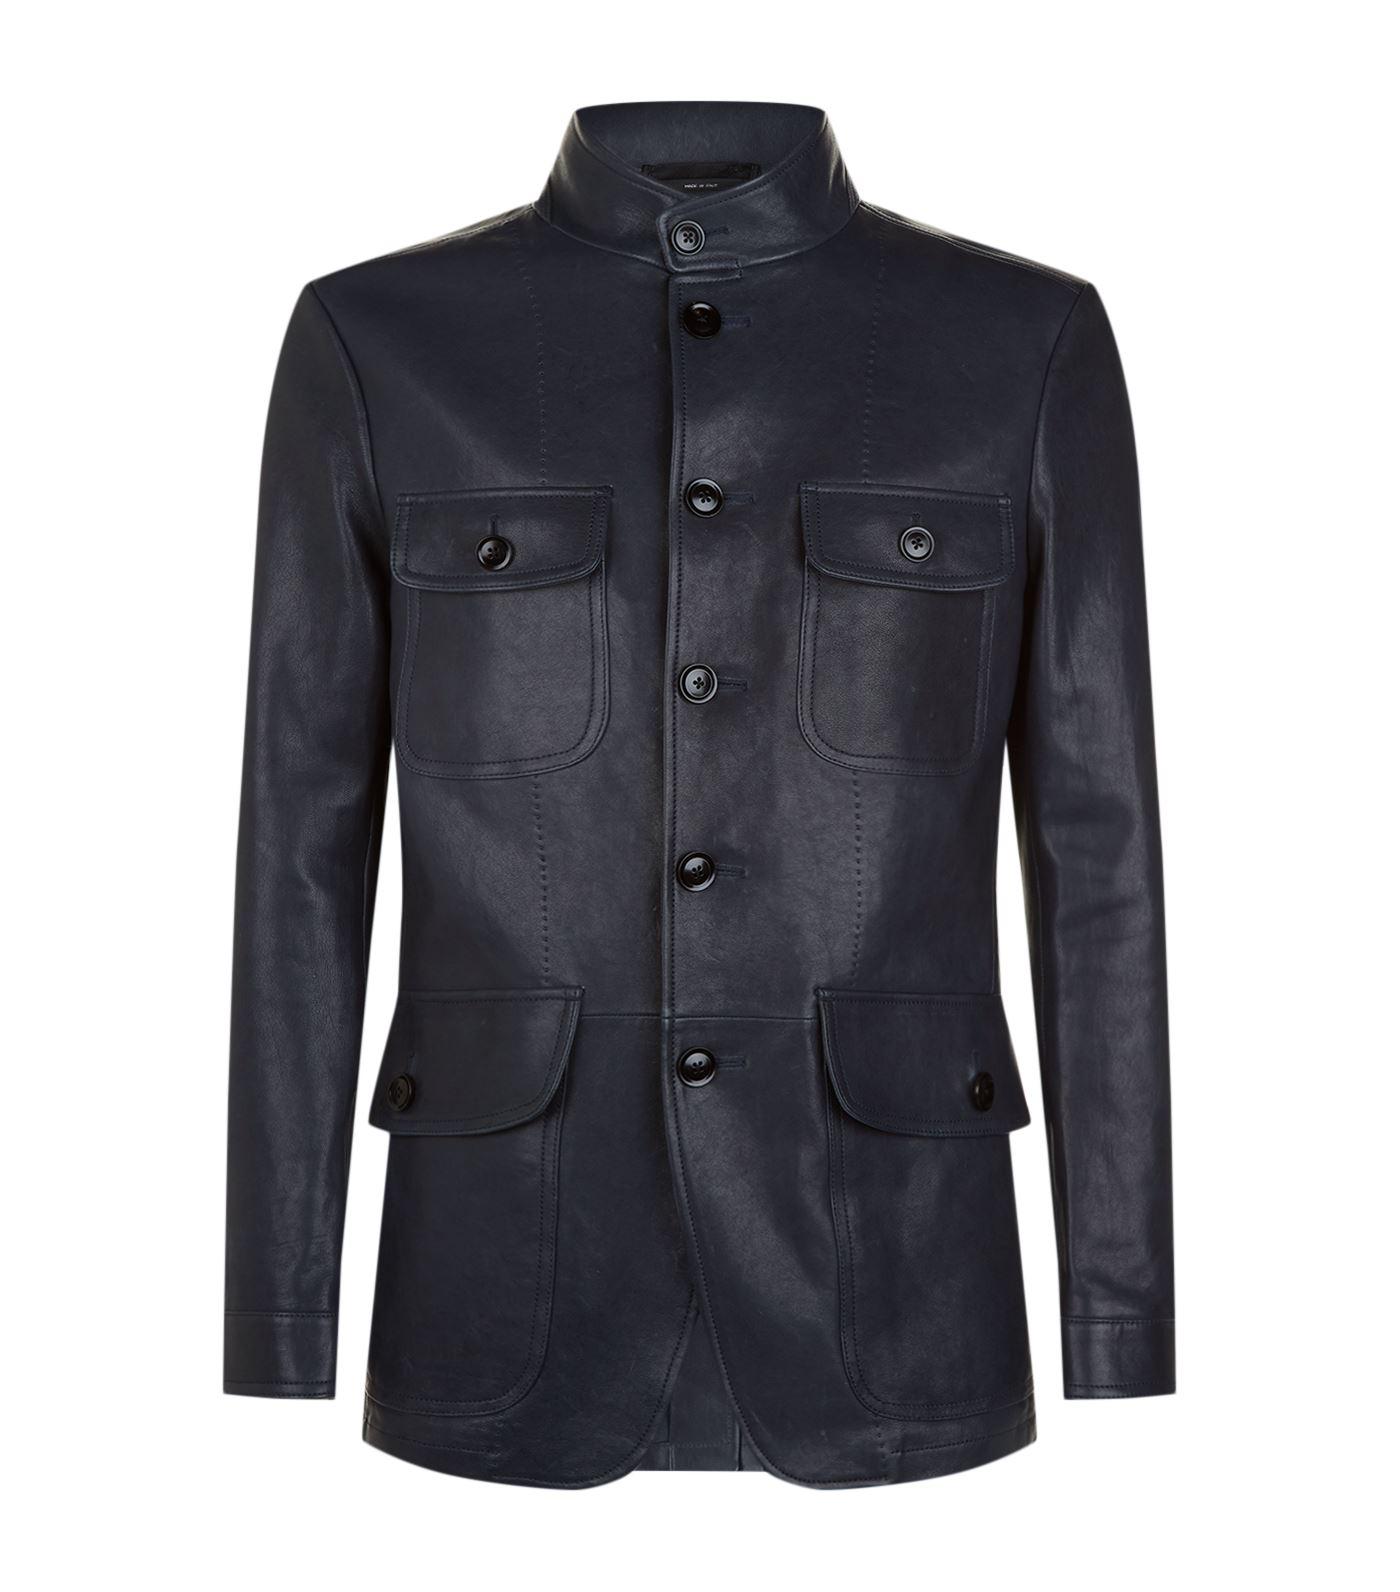 Tom Ford Military Leather Jacket in Navy (Blue) for Men - Lyst